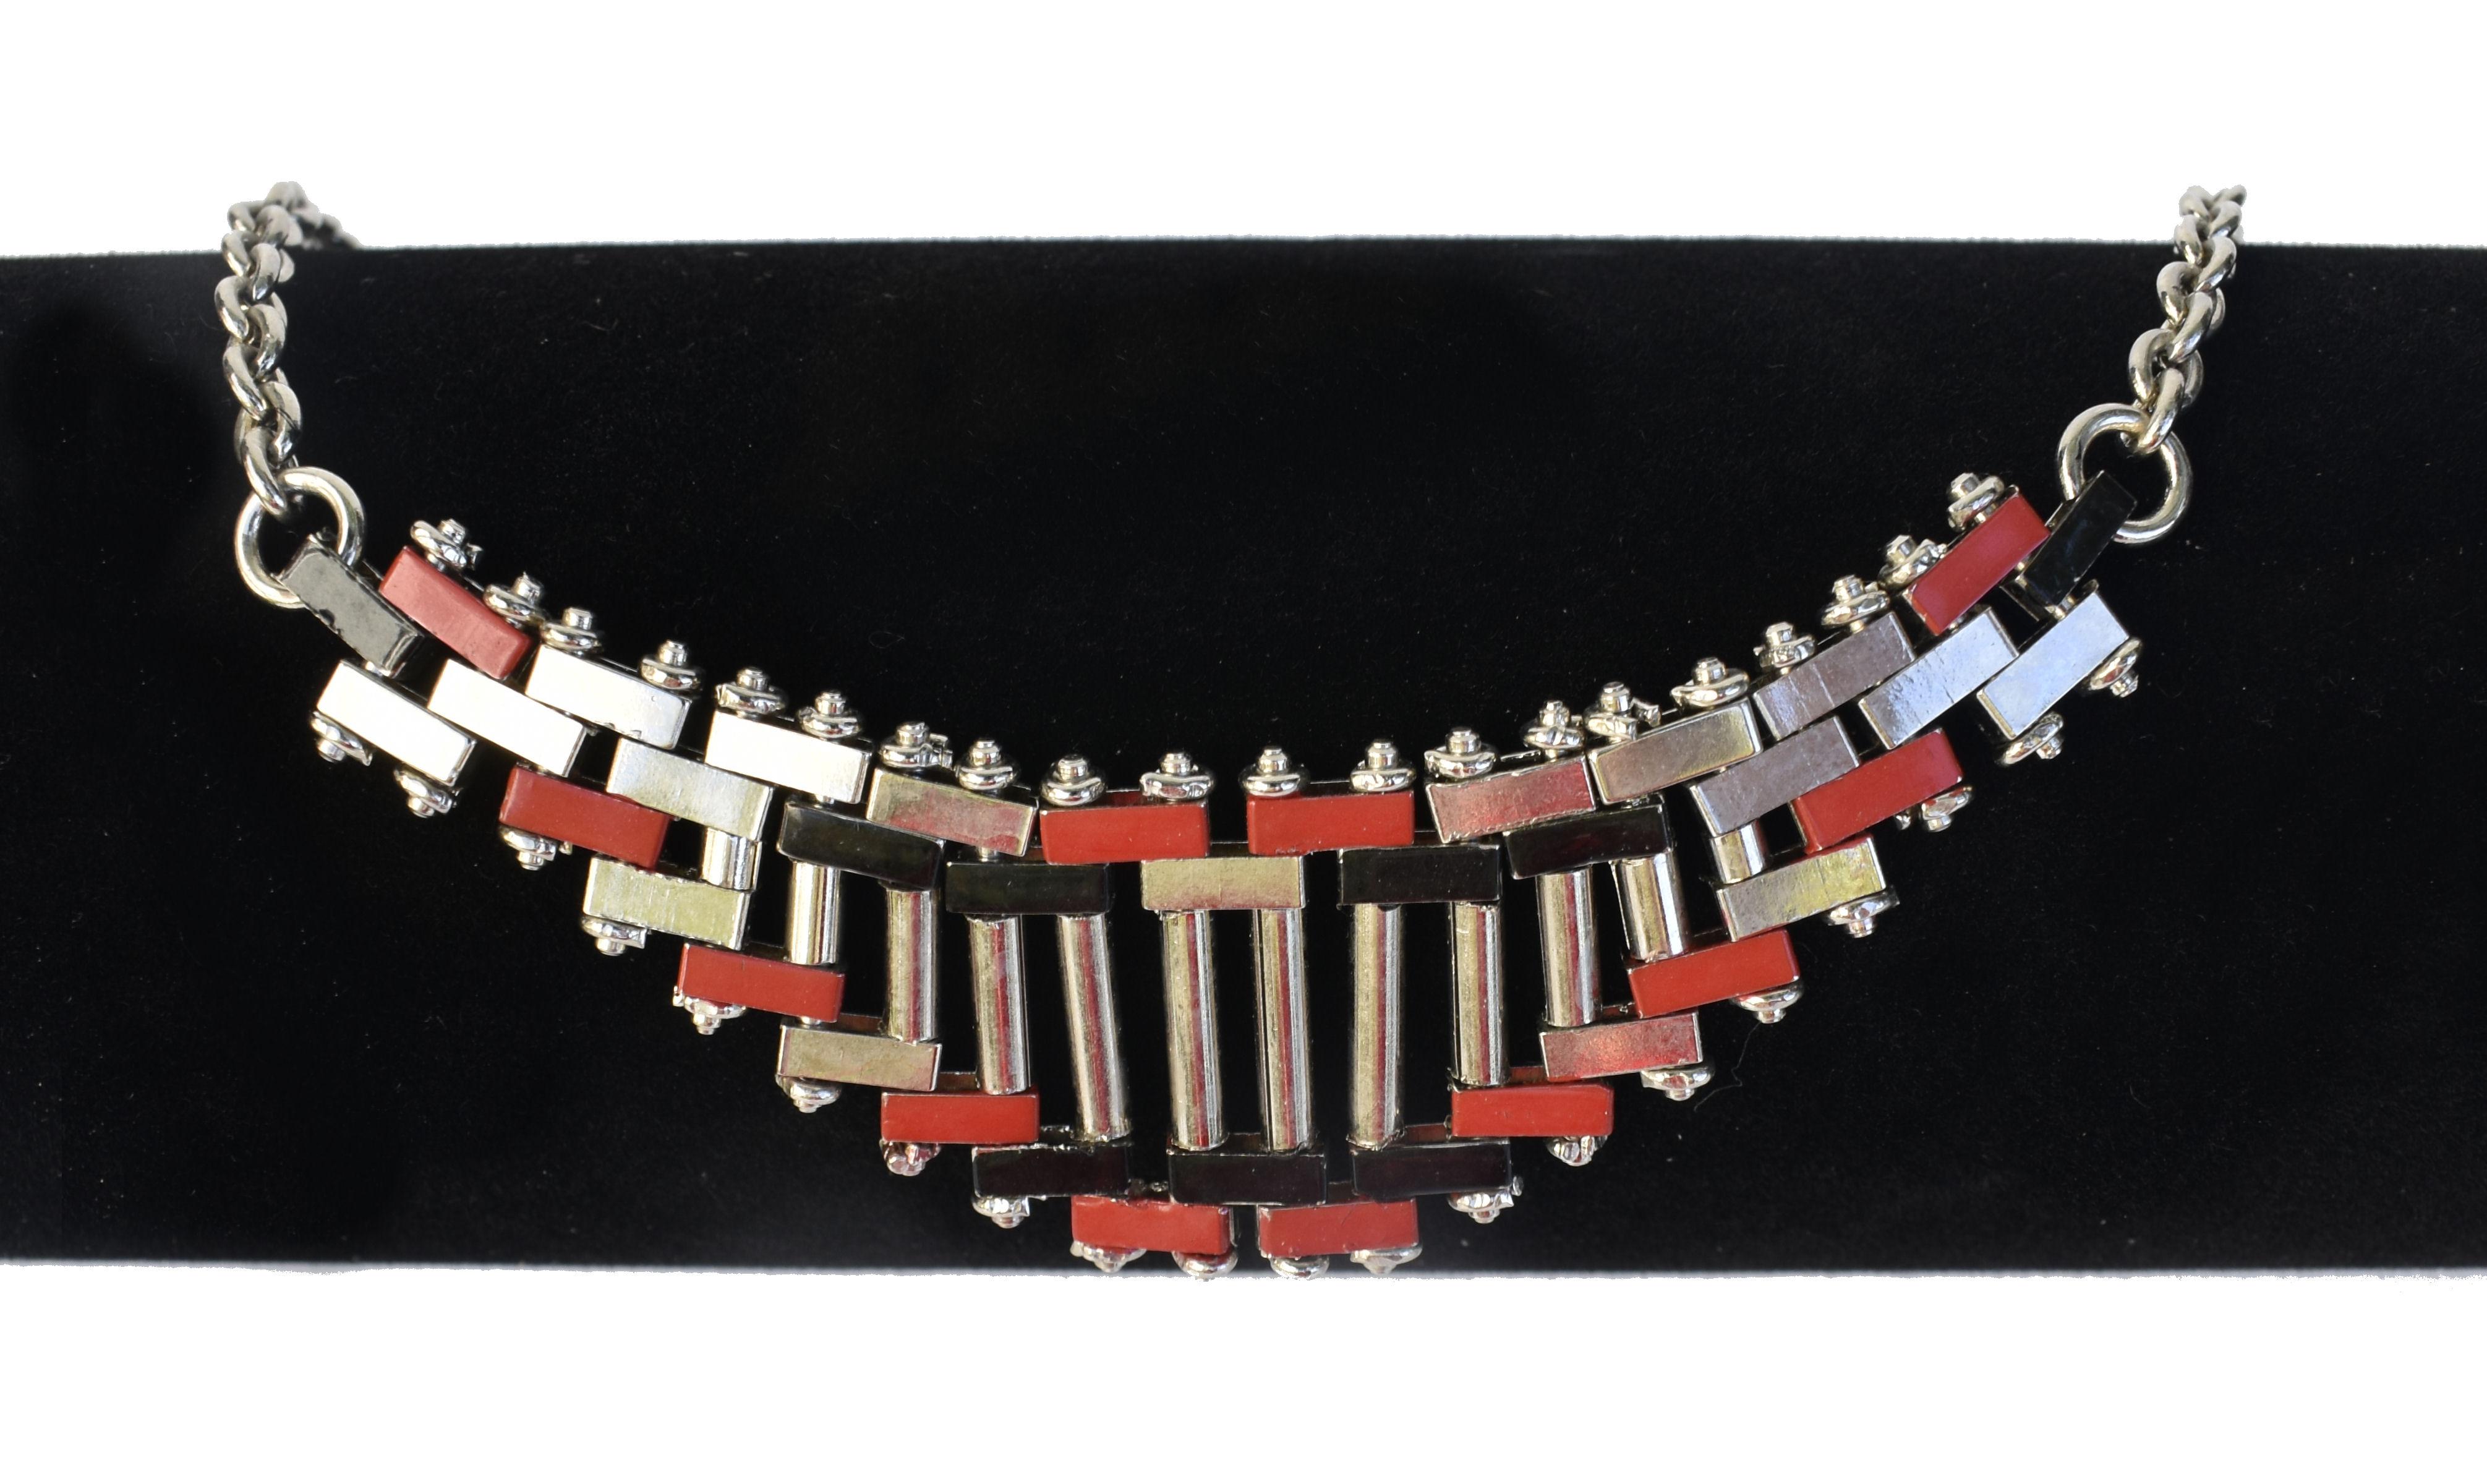 Extremely stylish piece of jewellery from the house of Jakob Bengel, dating to the 1930's and so advanced for it's time in it's design that one could be forgiven for not recognising it as a period piece. One of the leading manufacturers of Art Deco